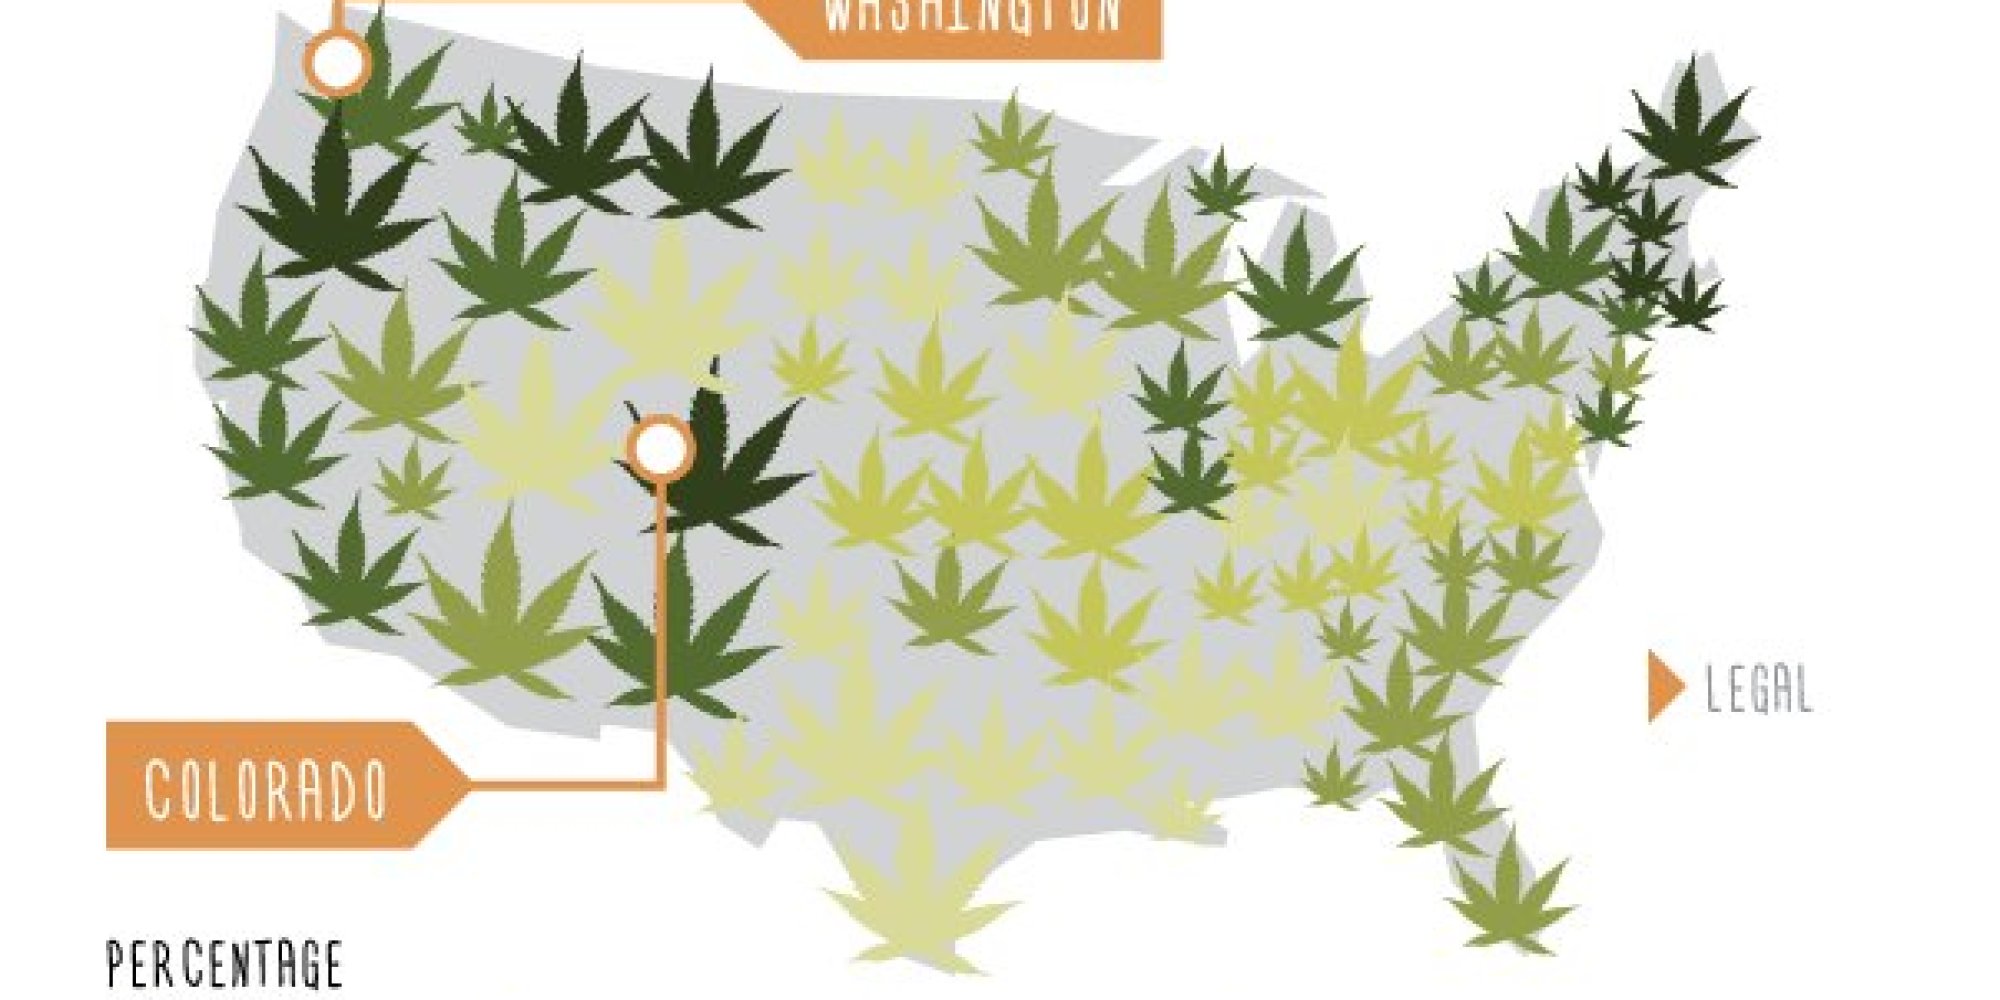 Why Legalizing Weed Just Makes Sense, In 12 Charts